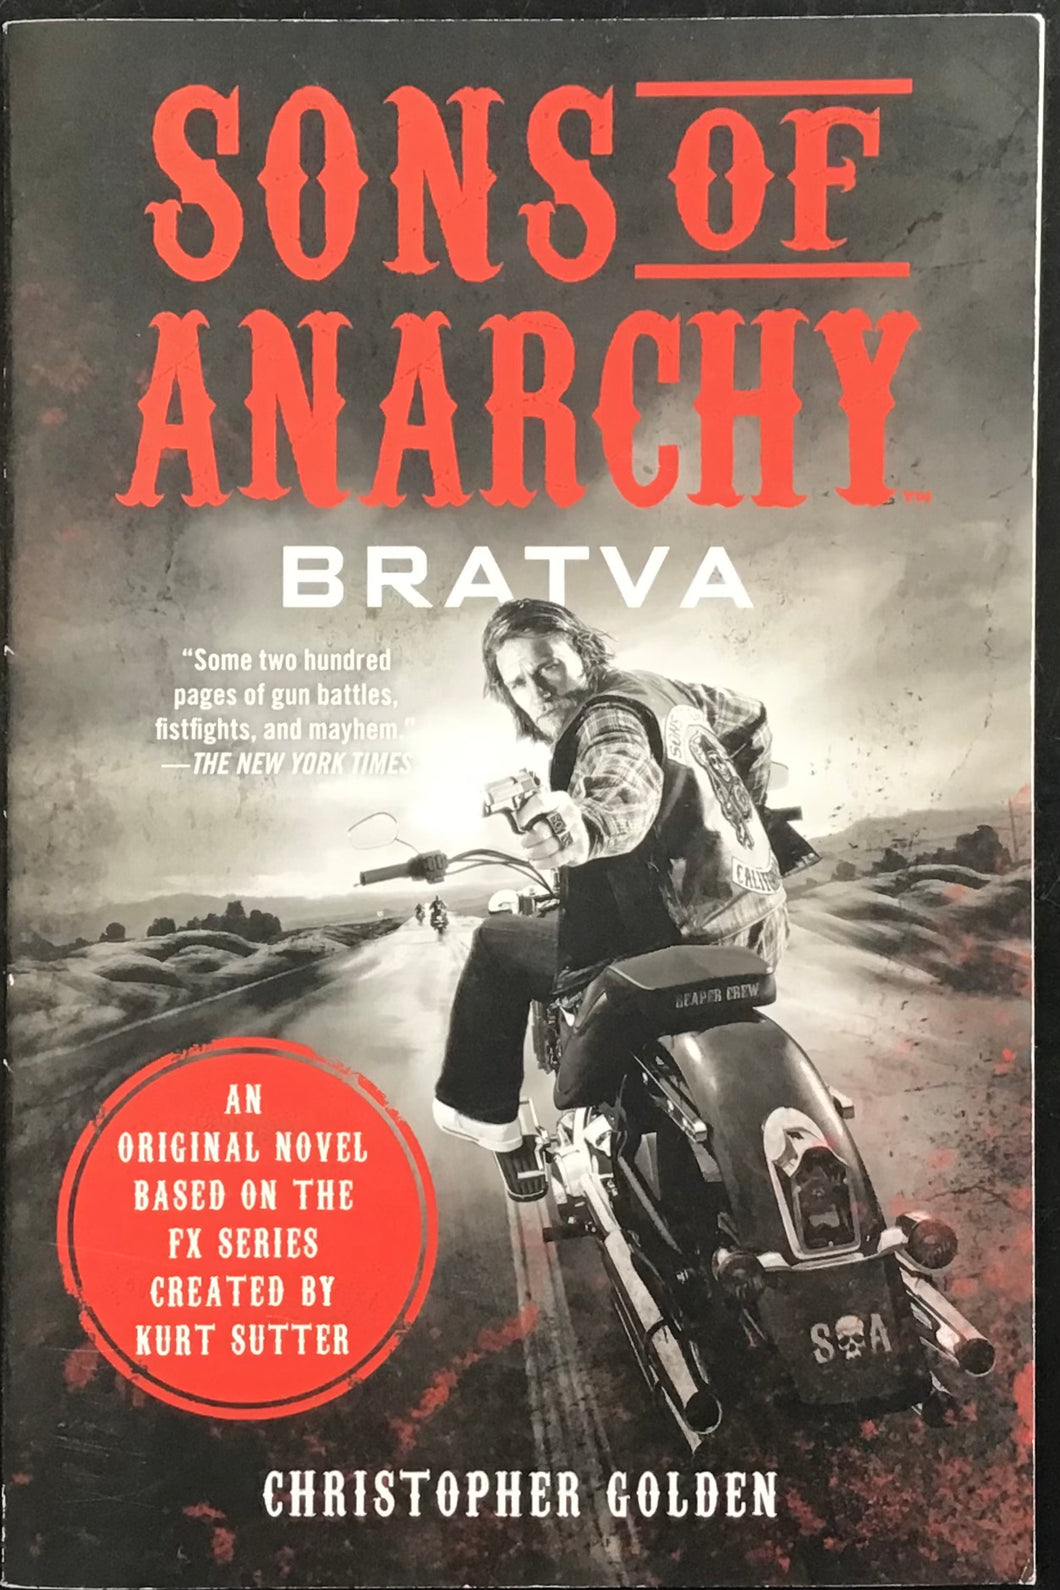 Sons of Anarchy, by Christopher Golden